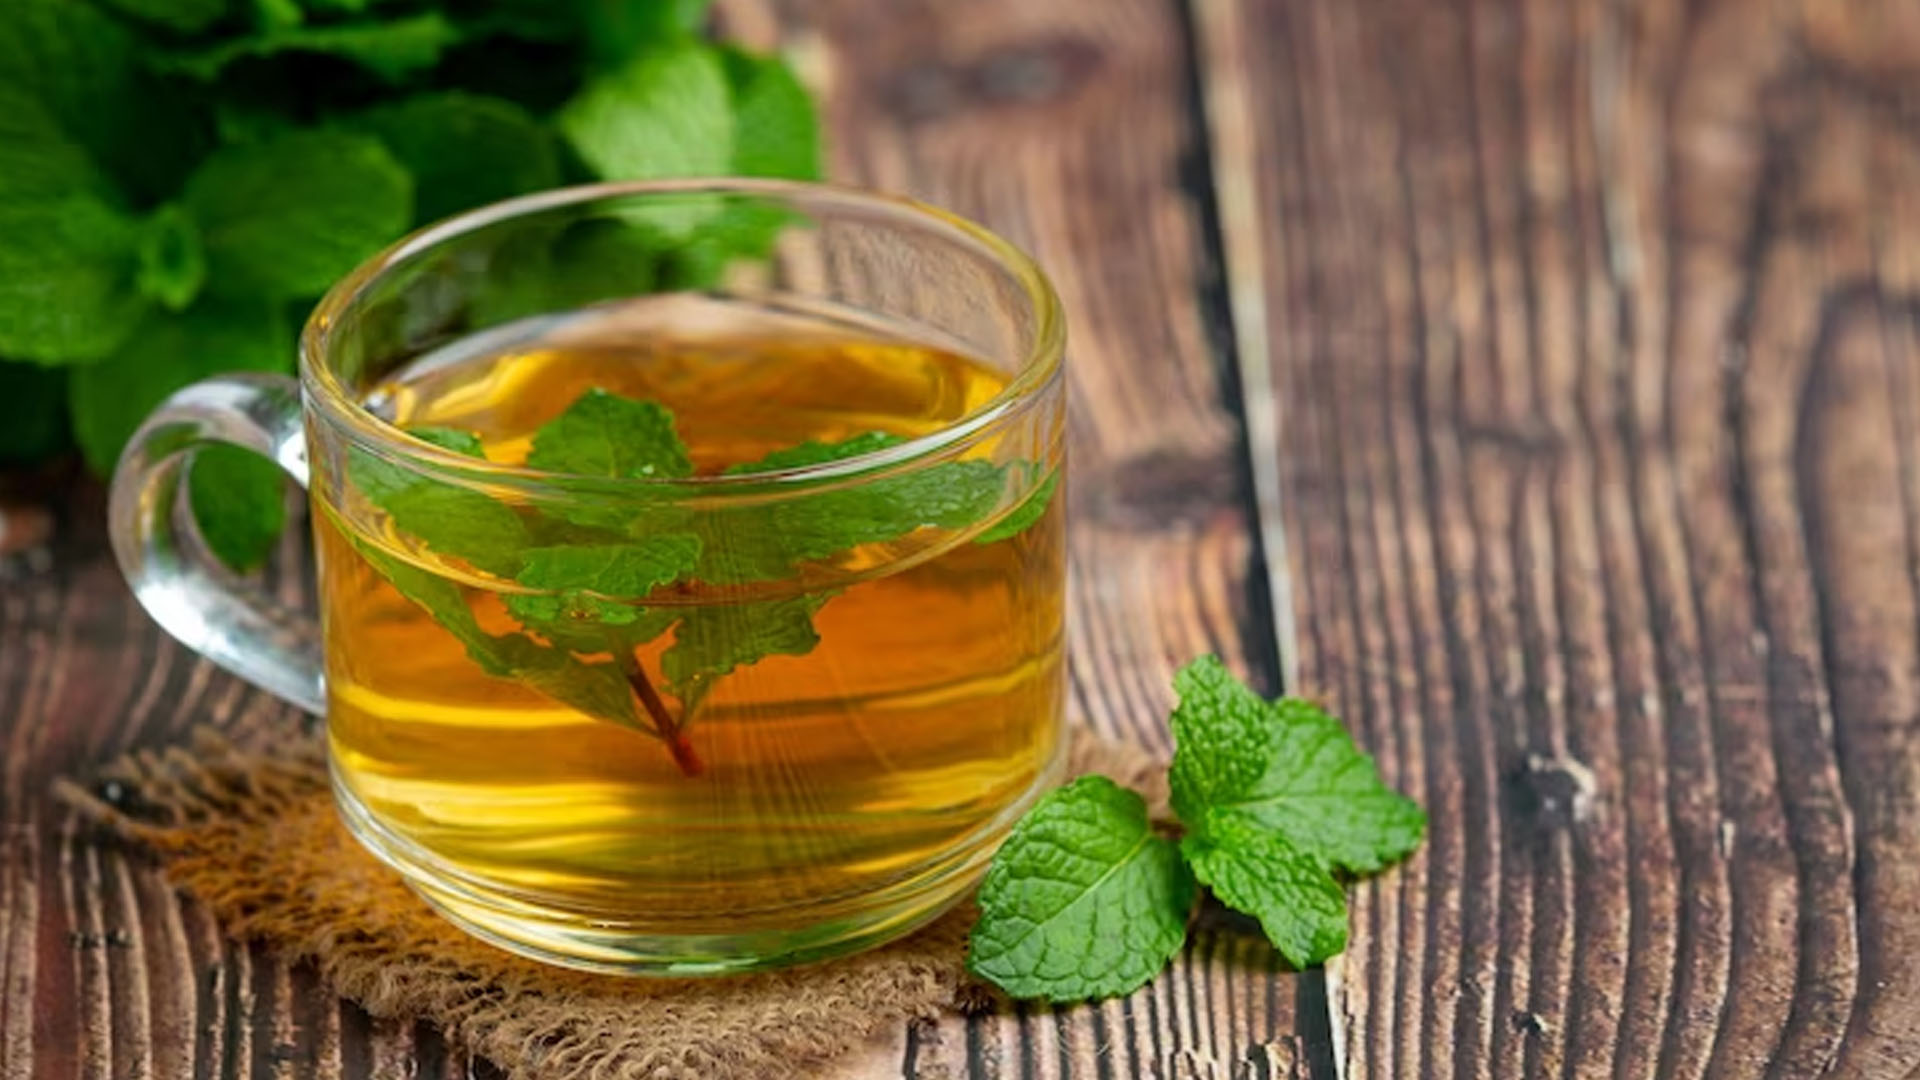 Does Mint Tea Have Any Health Benefits?